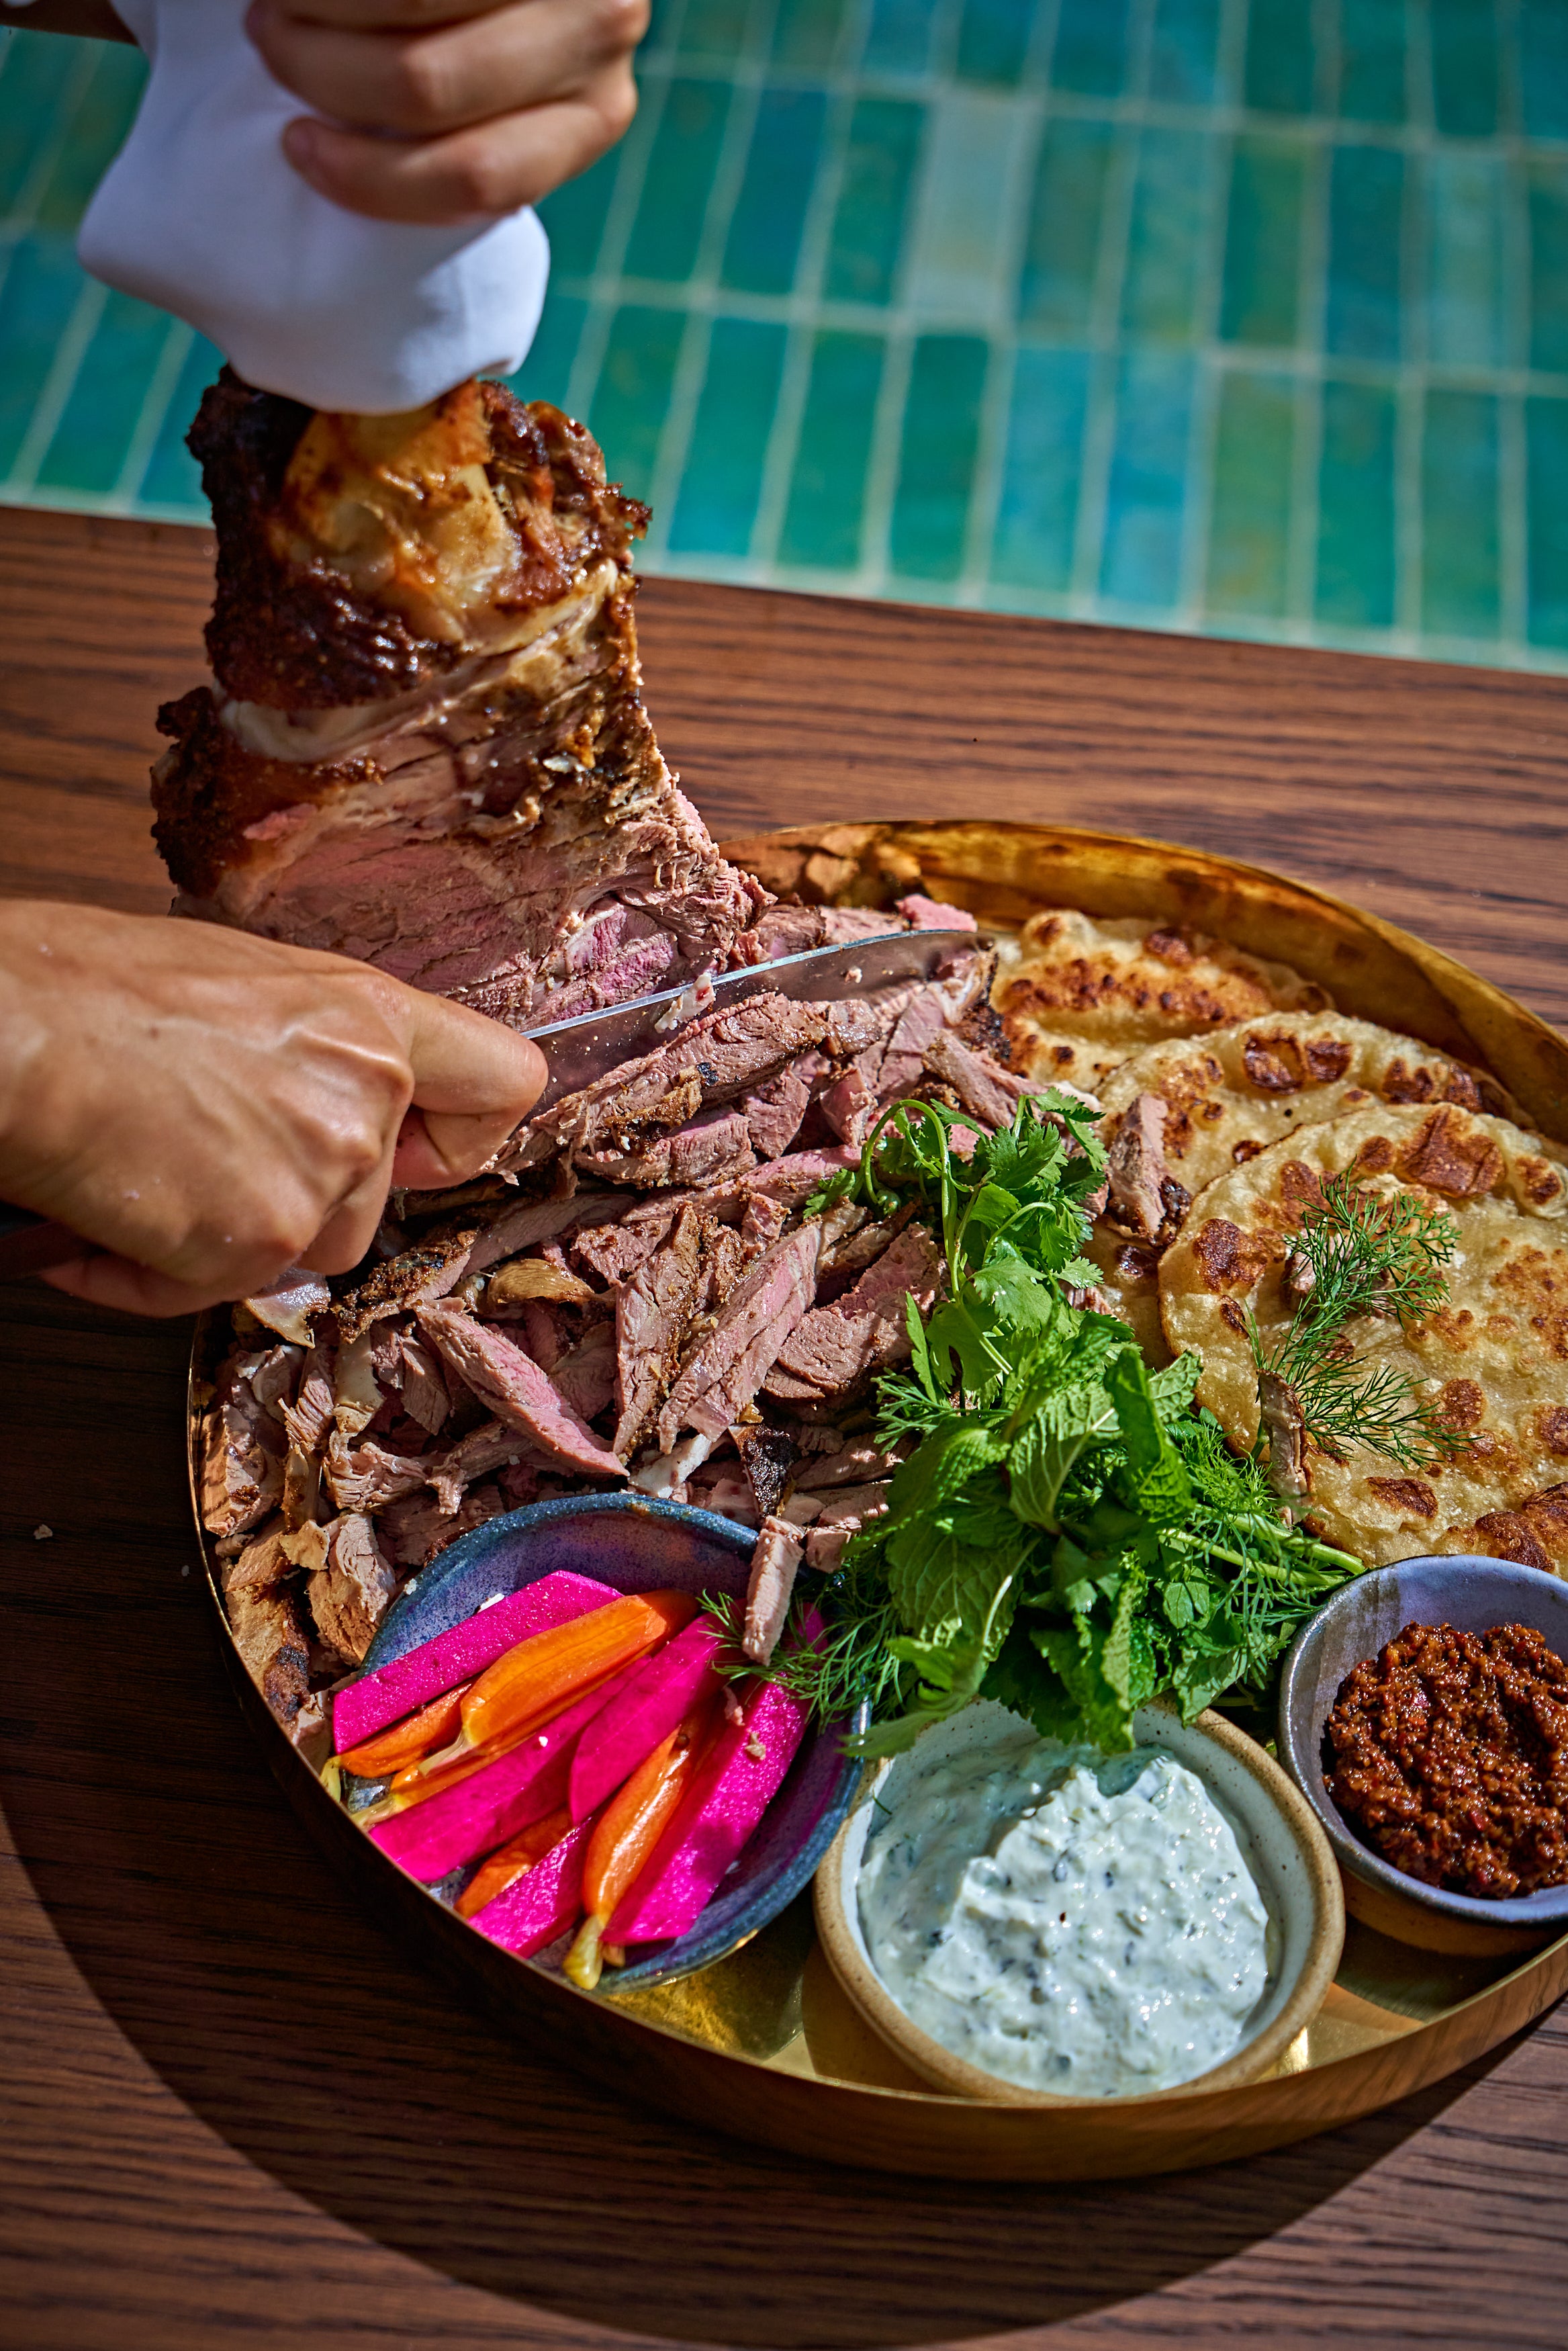 There’s elements of showmanship, for example fire-roasted leg of lamb is shaved onto the plate at your table